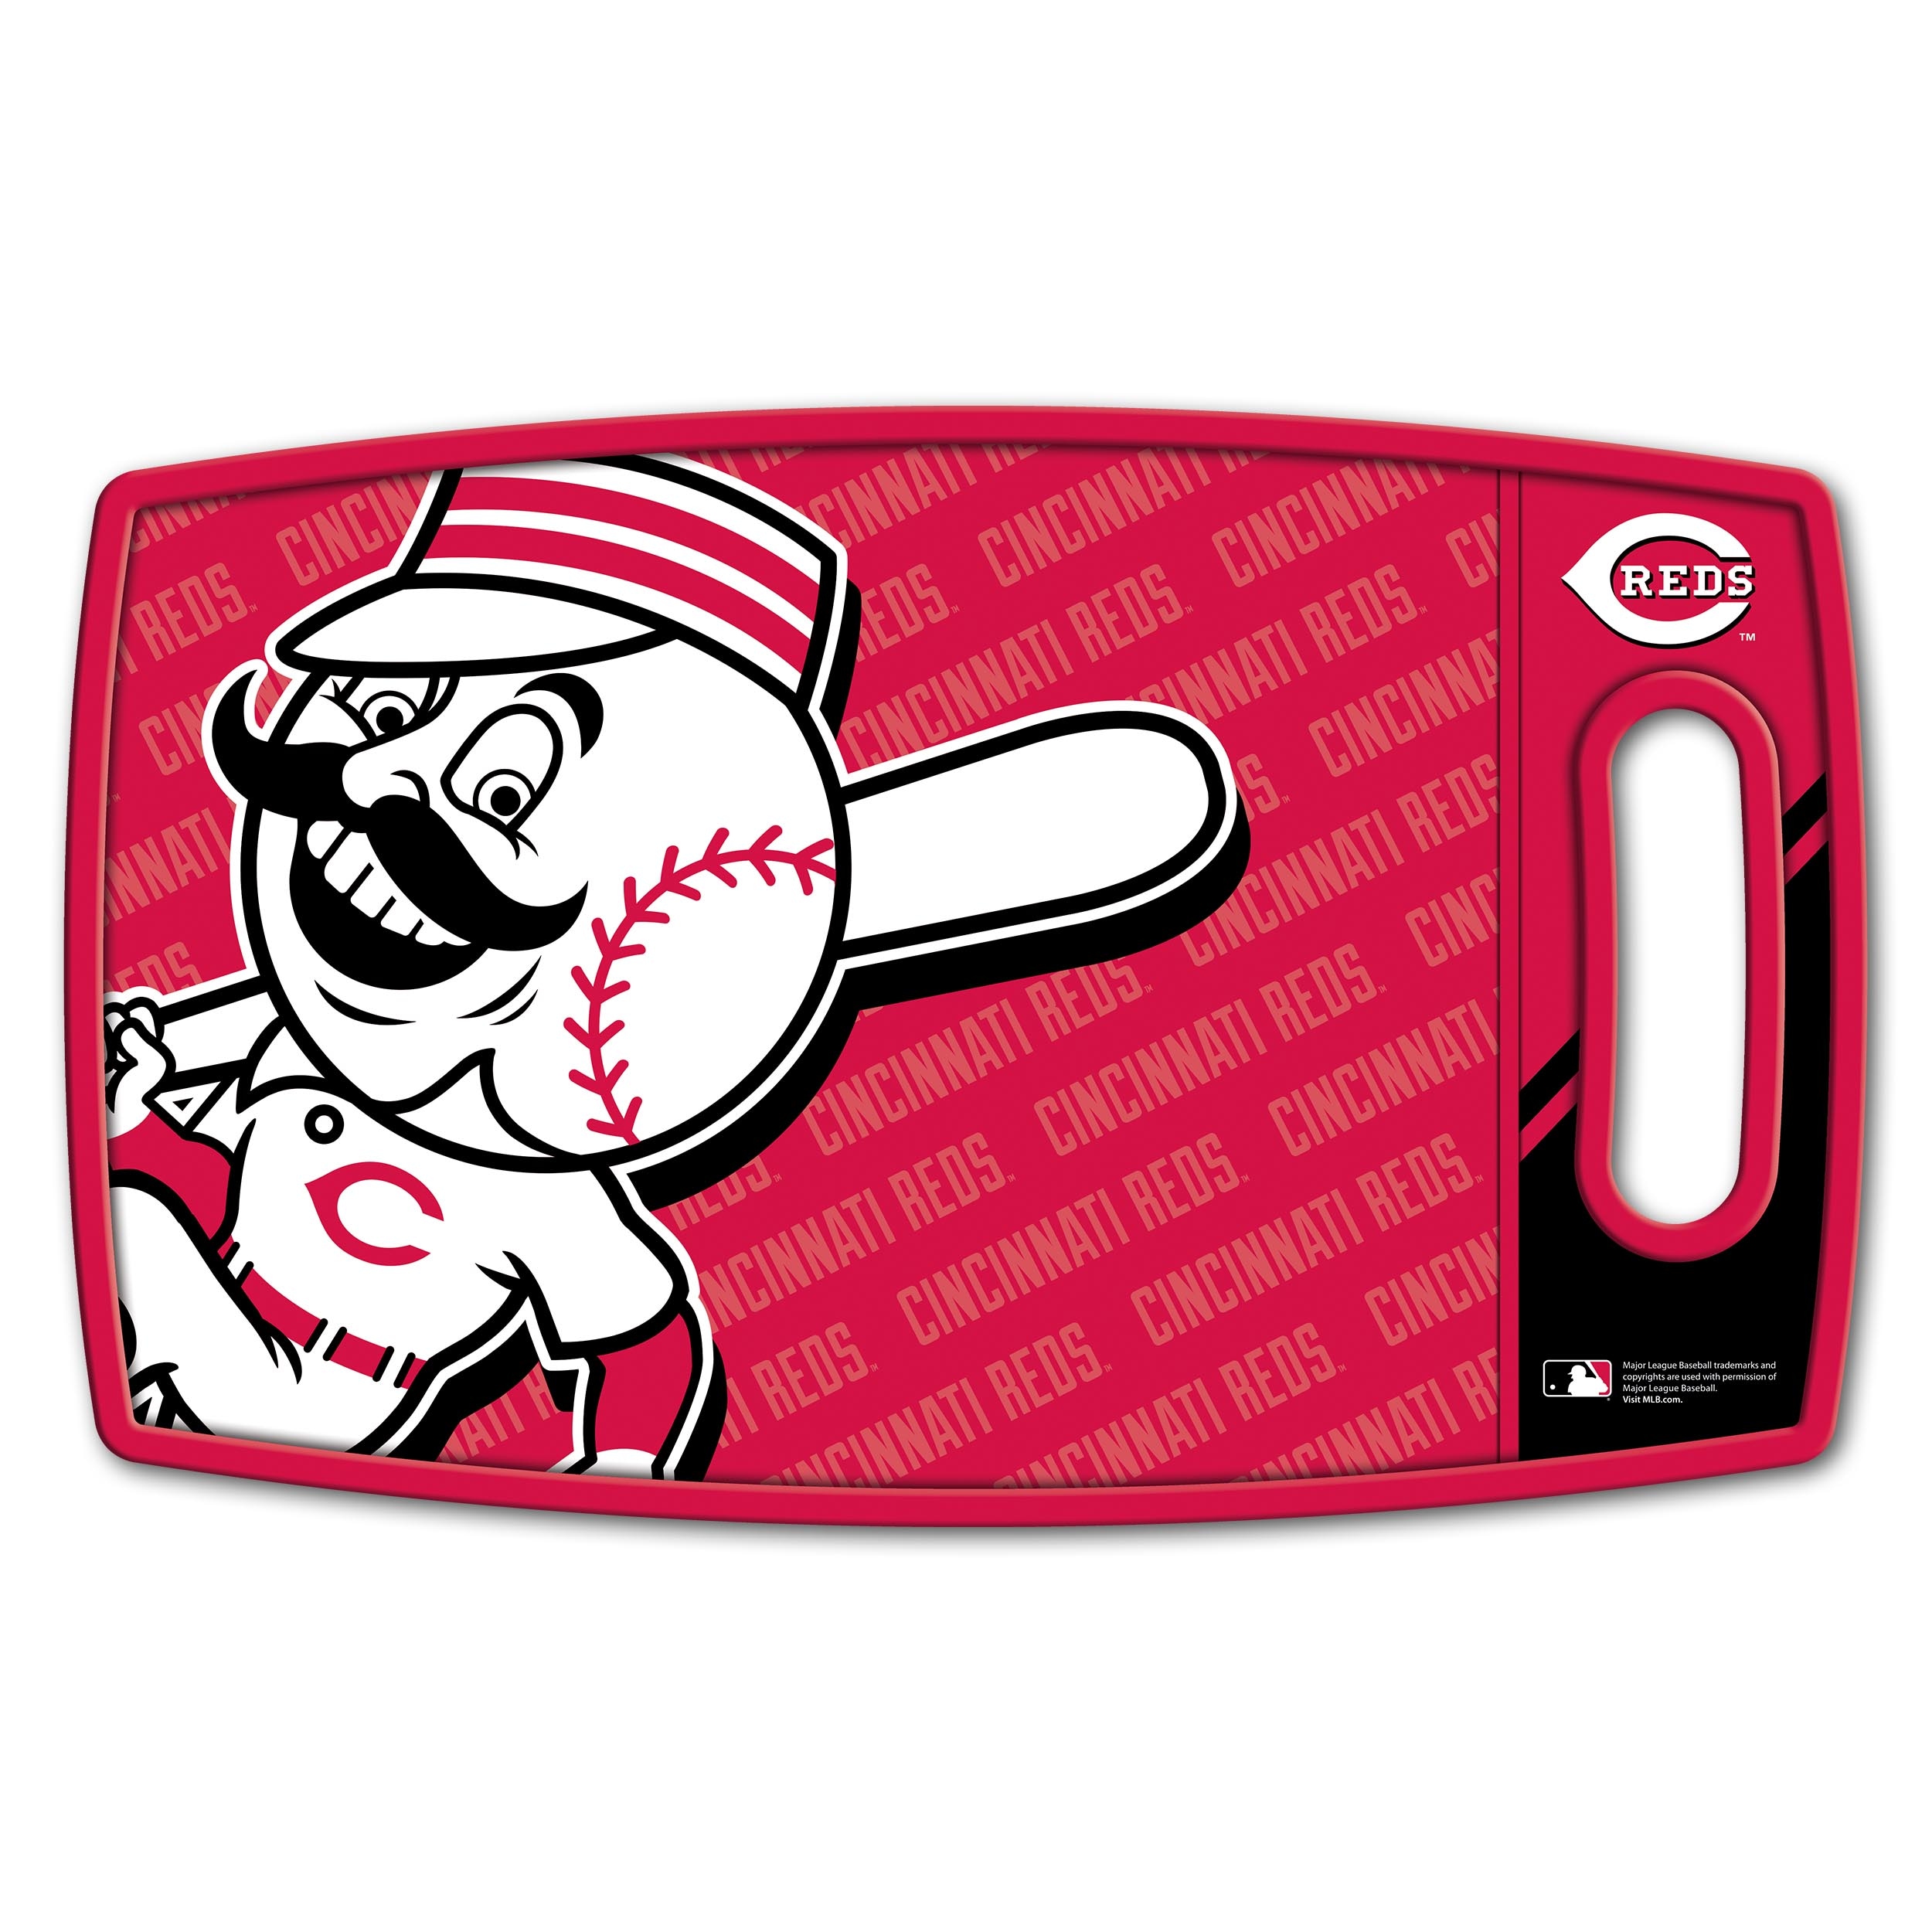 Official Vintage Reds Clothing, Throwback Cincinnati Reds Gear, Reds Vintage  Collection